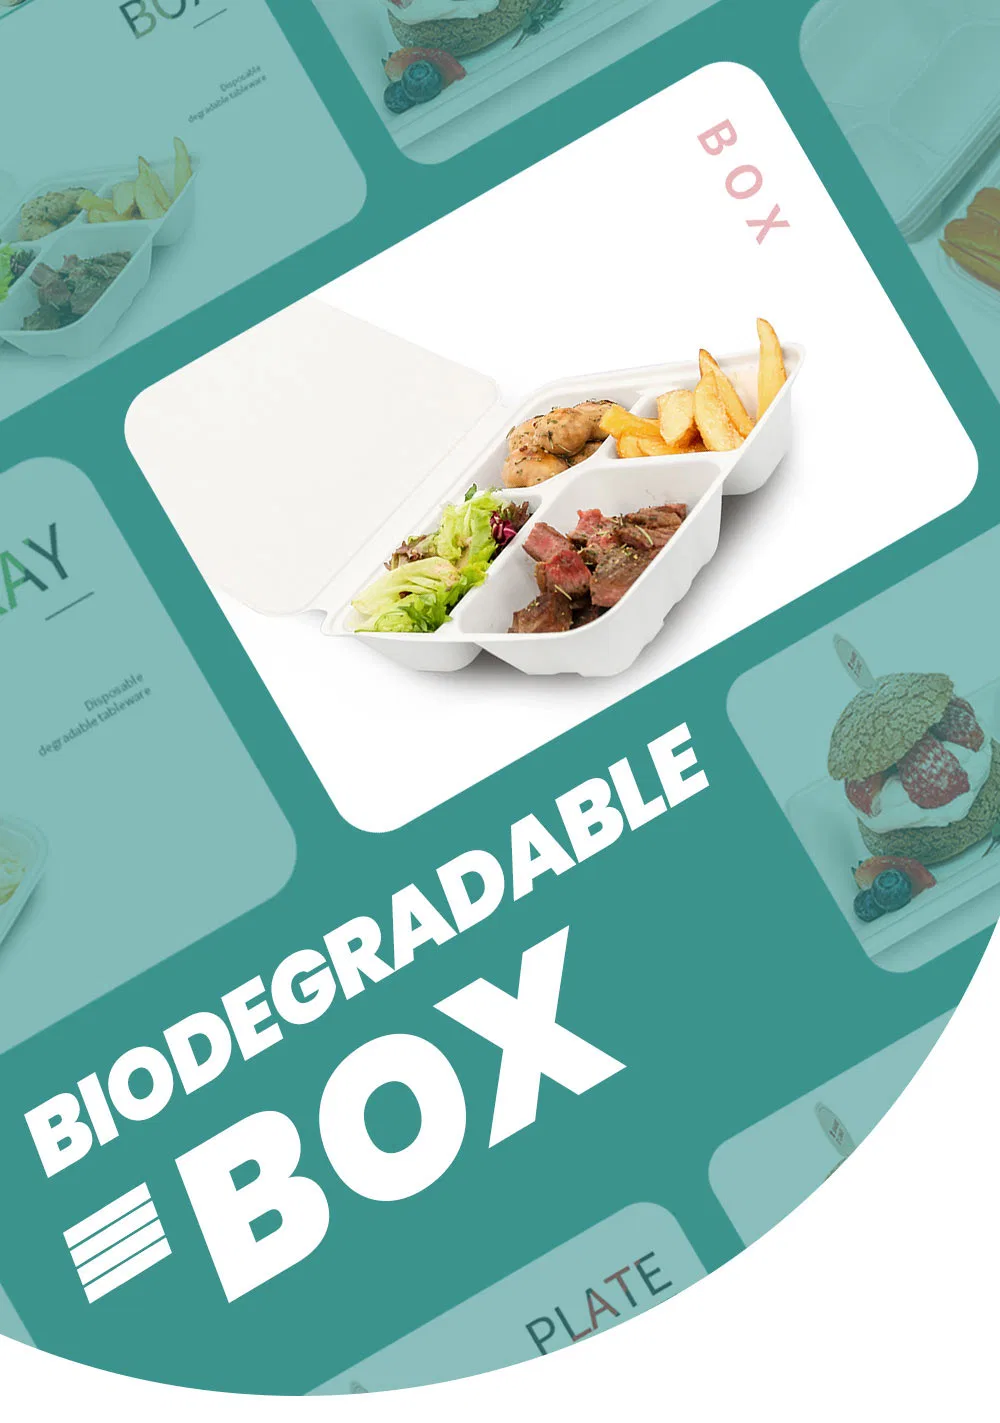 3 4 5 6 Compartment Salad Meat Box Wholesale Biodegradable Compostable Disposable Sugarcane Bagasse Paper Pulp Molded Catering Lunch Bento Food Box with Lids